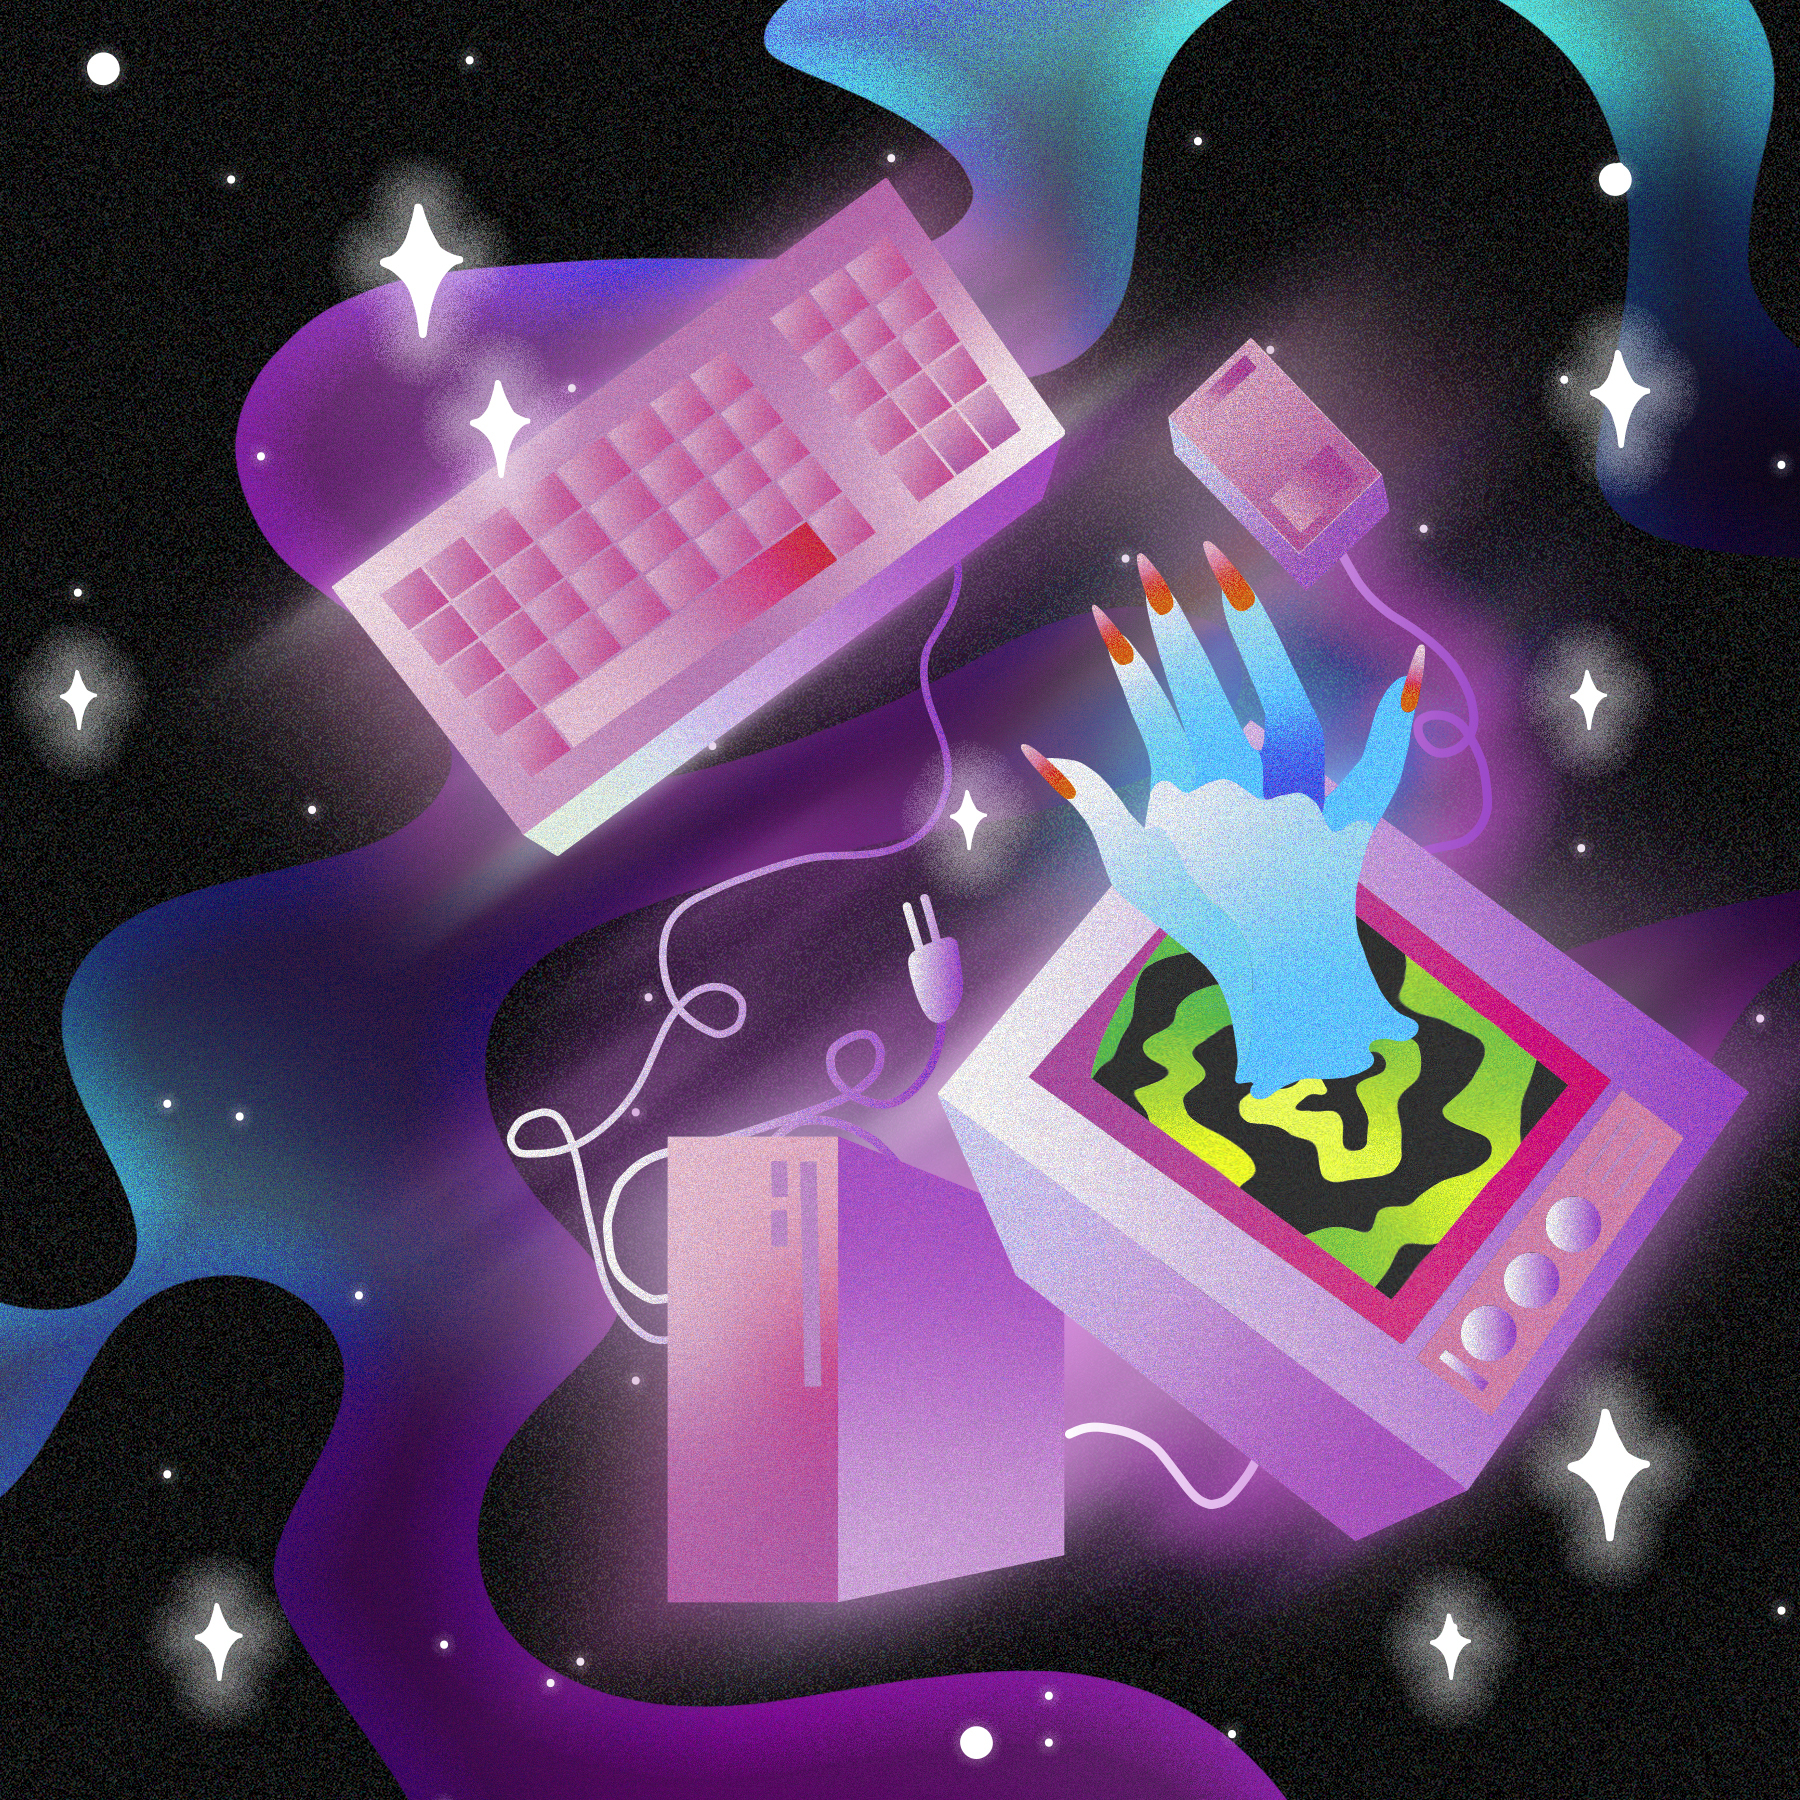 Image: a digital illustration featuring pink shiny keyboard, computer tower, and monitor floating in spce. There is a bluehand reaching out of the monitor. Illustration by Diana Pietrzyk.